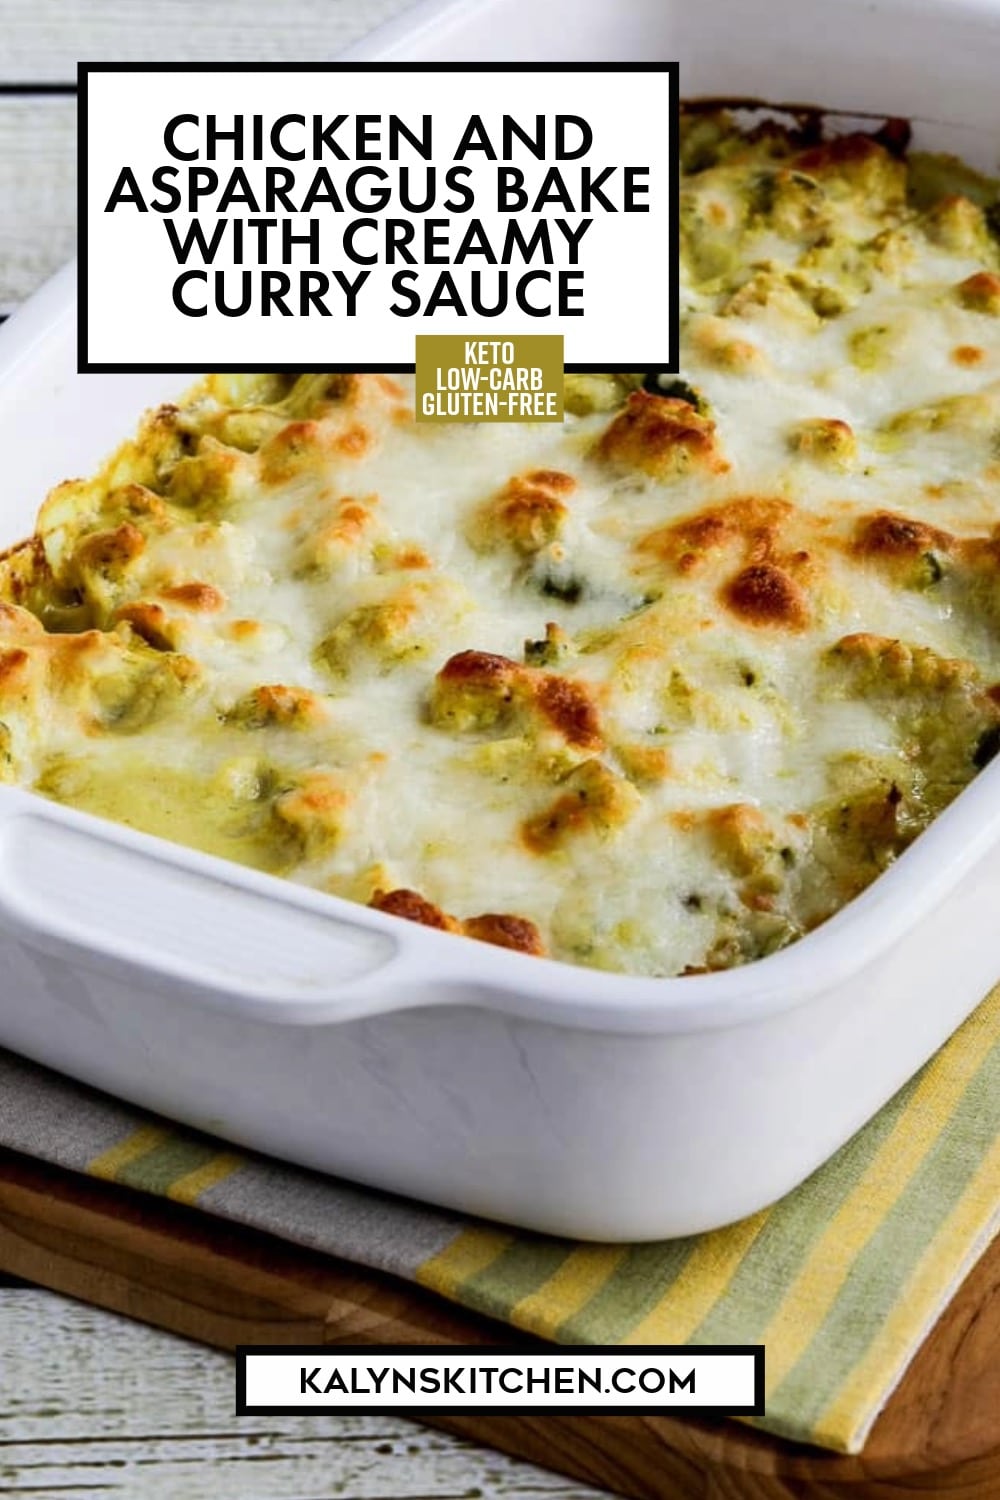 Pinterest image of Chicken and Asparagus Bake with Creamy Curry Sauce